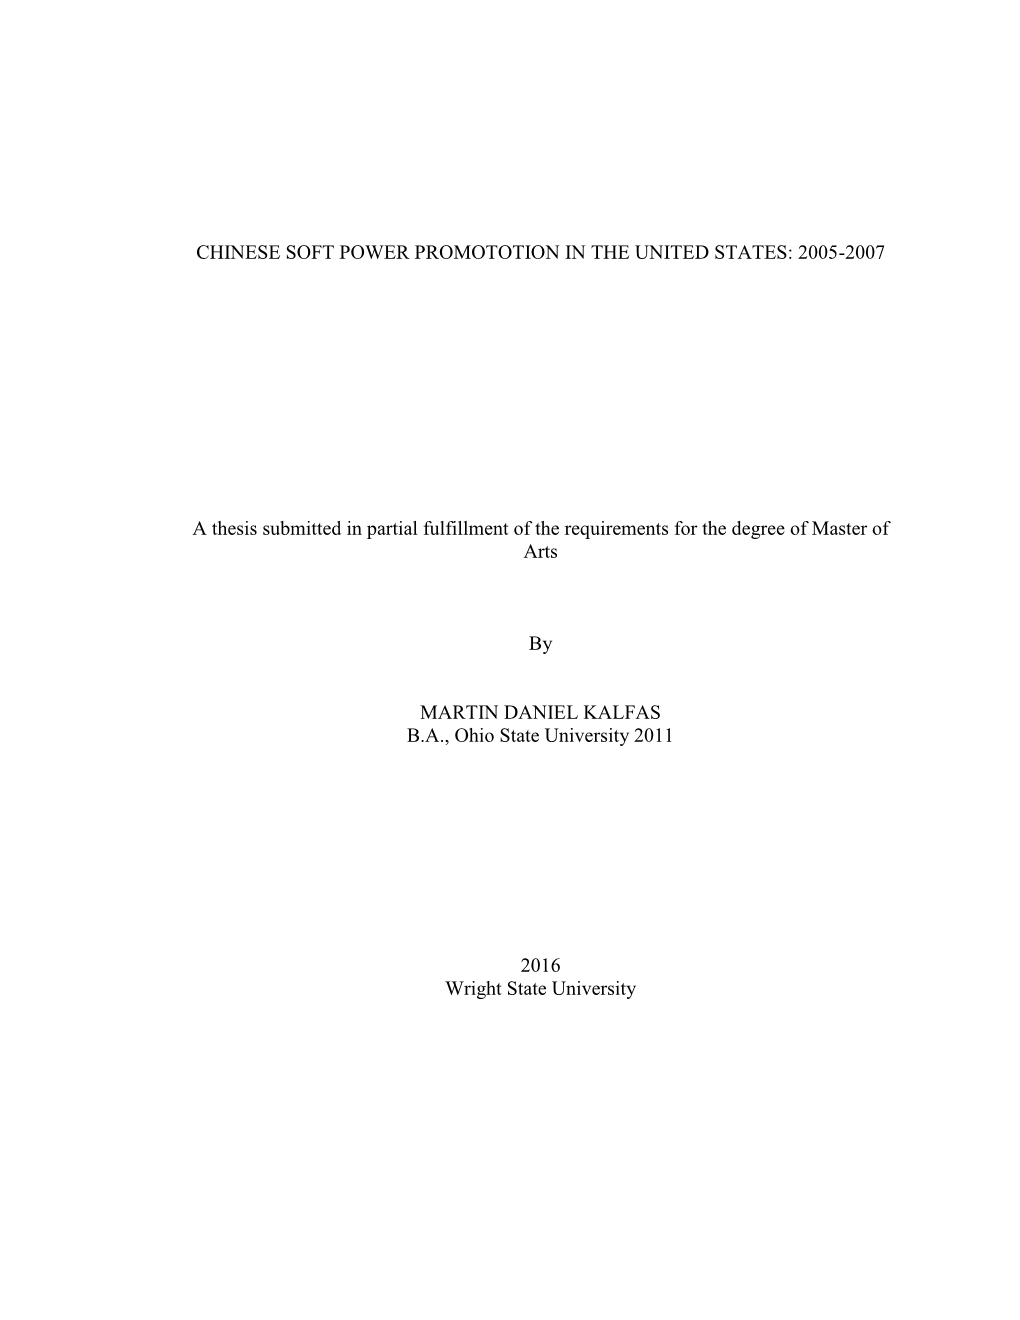 CHINESE SOFT POWER PROMOTOTION in the UNITED STATES: 2005-2007 a Thesis Submitted in Partial Fulfillment of the Requirements